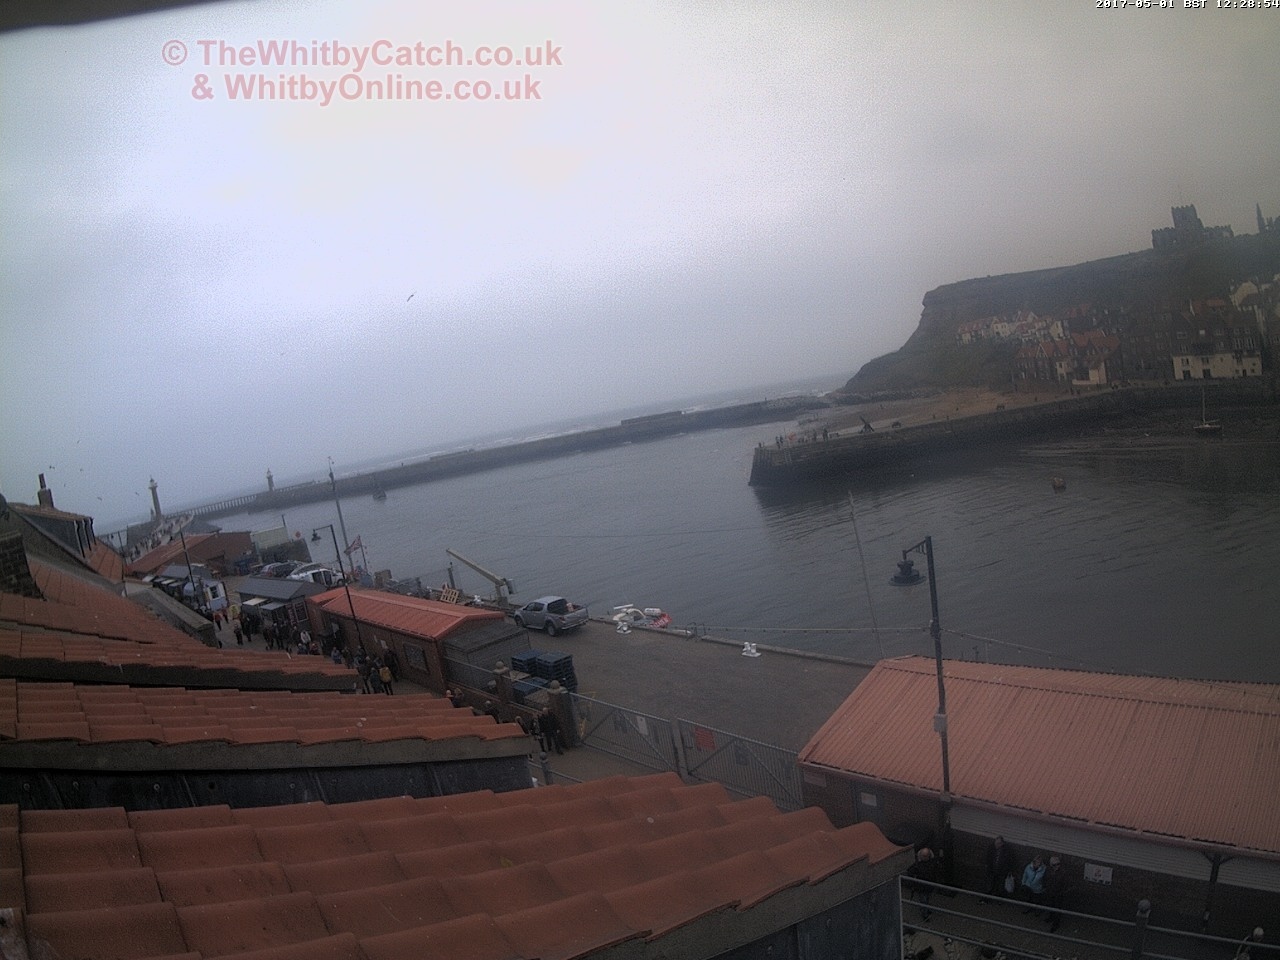 Whitby Mon 1st May 2017 12:29.